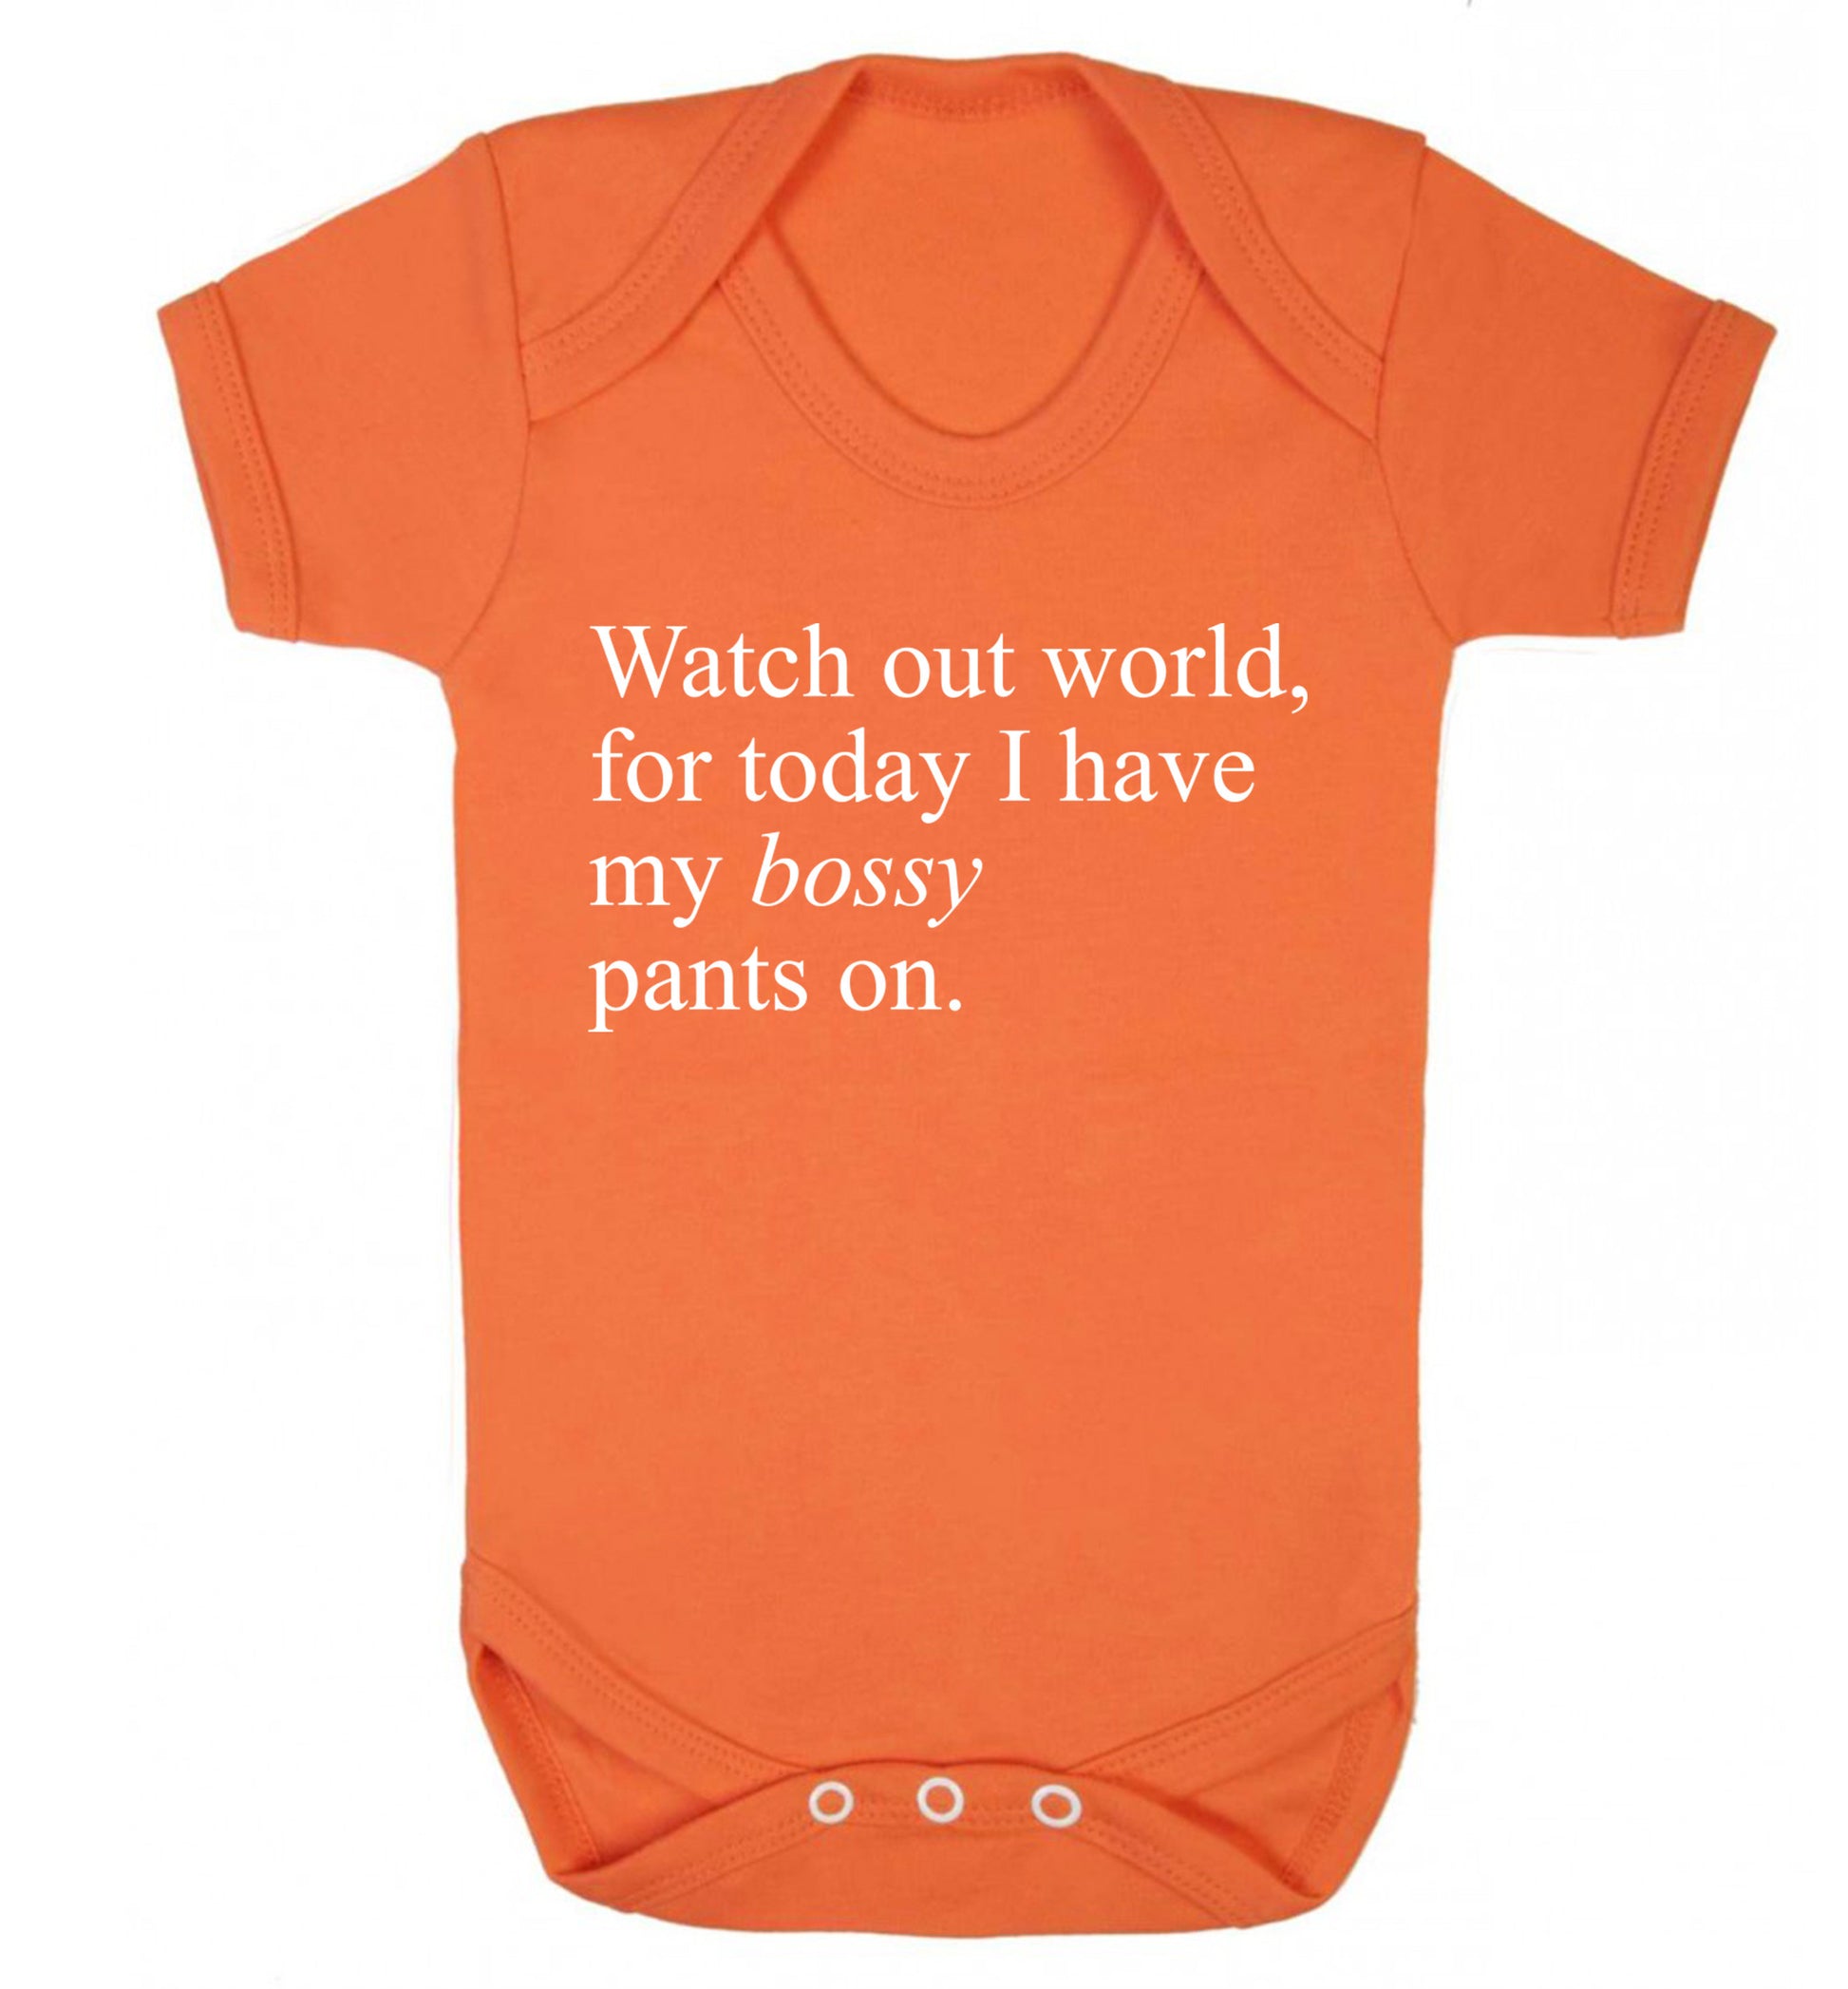 Watch out world, for today I have my bossy pants on Baby Vest orange 18-24 months